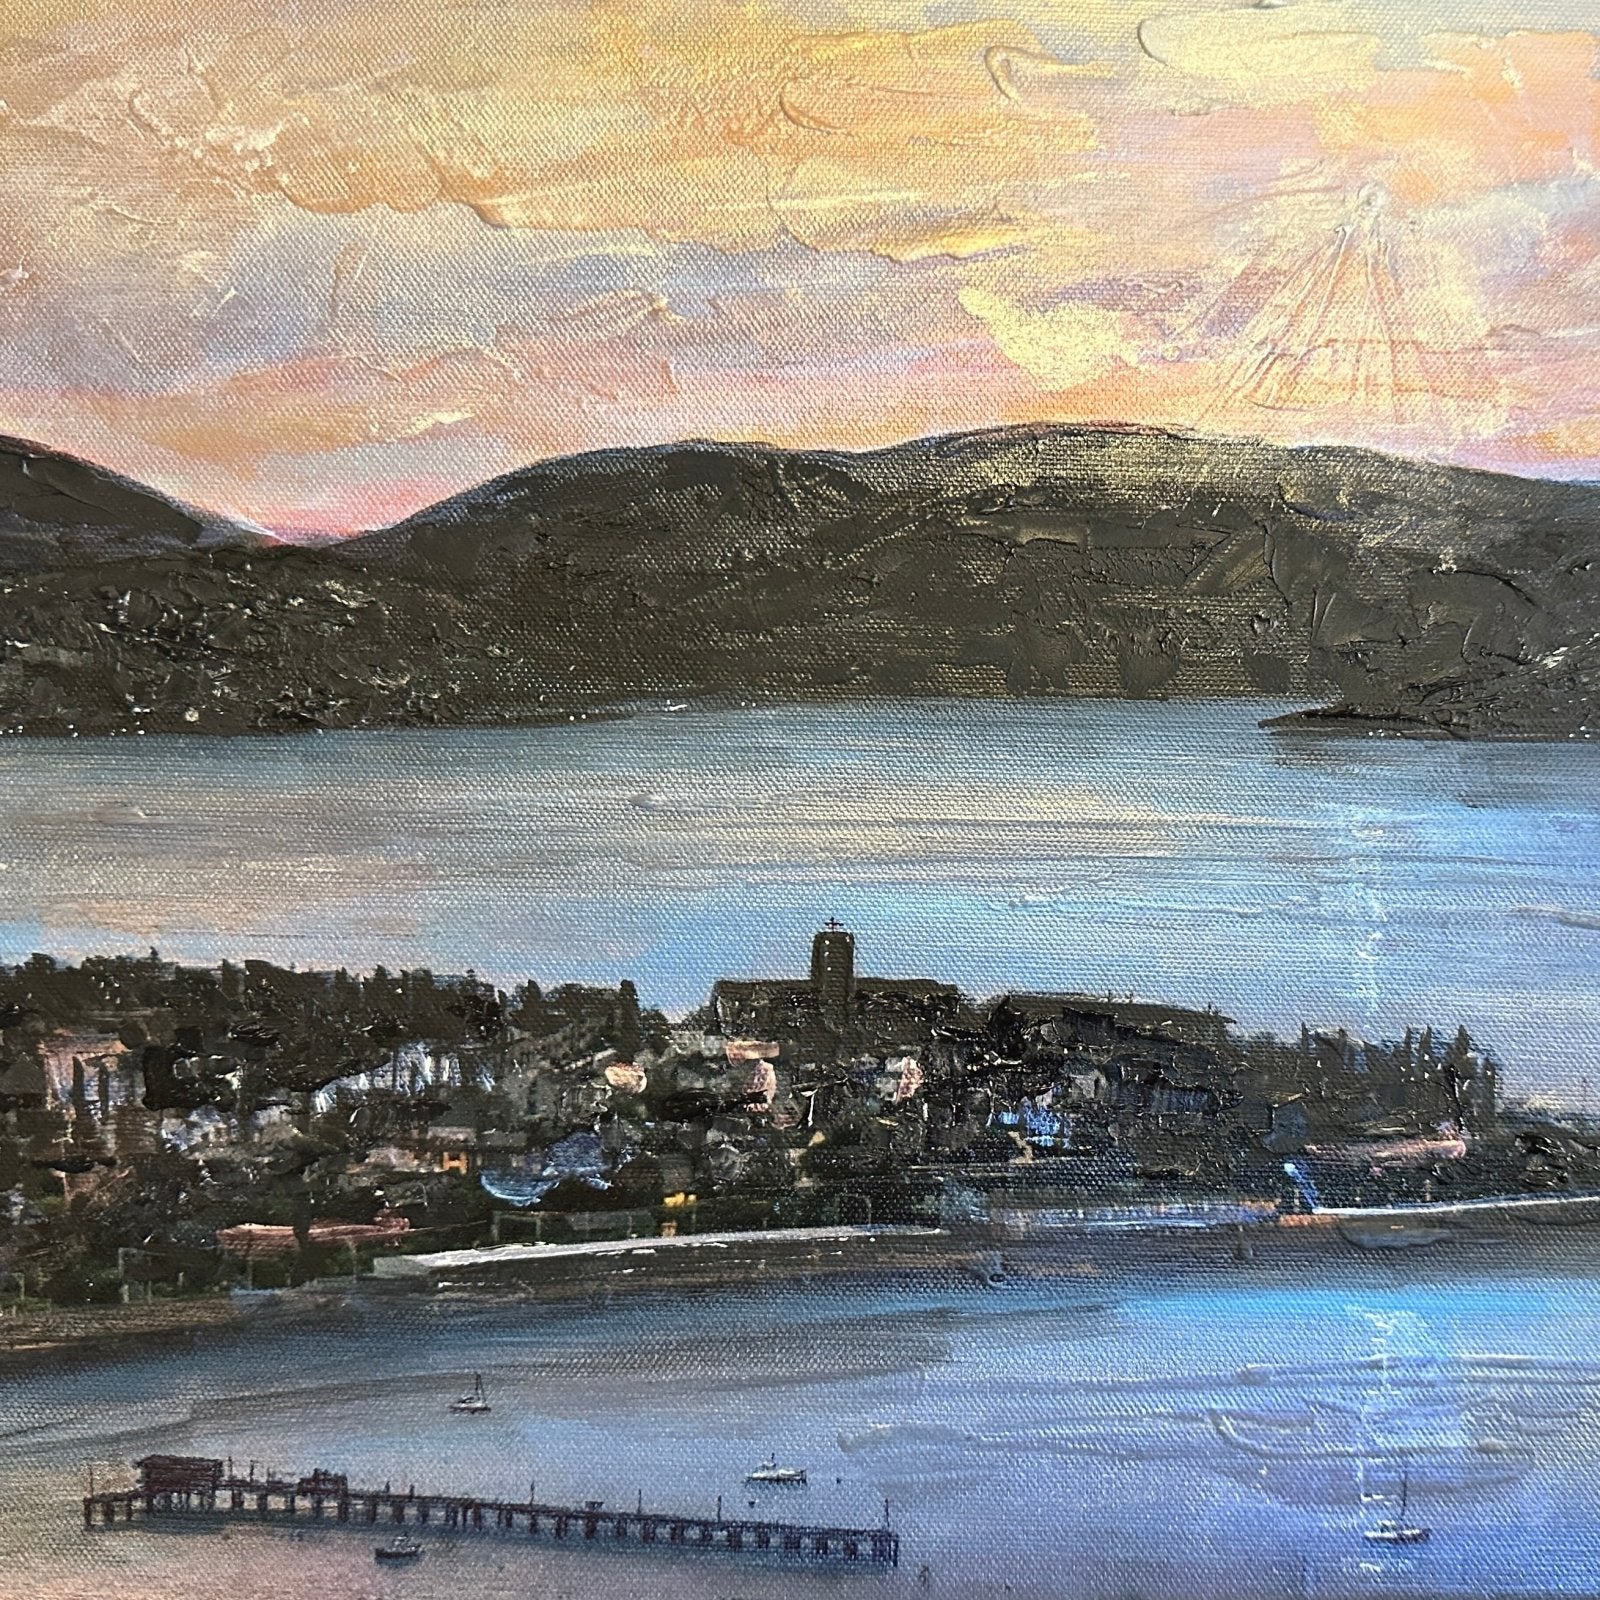 From Lyle Hill Wooden Art Block-Wooden Art Blocks-River Clyde Art Gallery-Paintings, Prints, Homeware, Art Gifts From Scotland By Scottish Artist Kevin Hunter